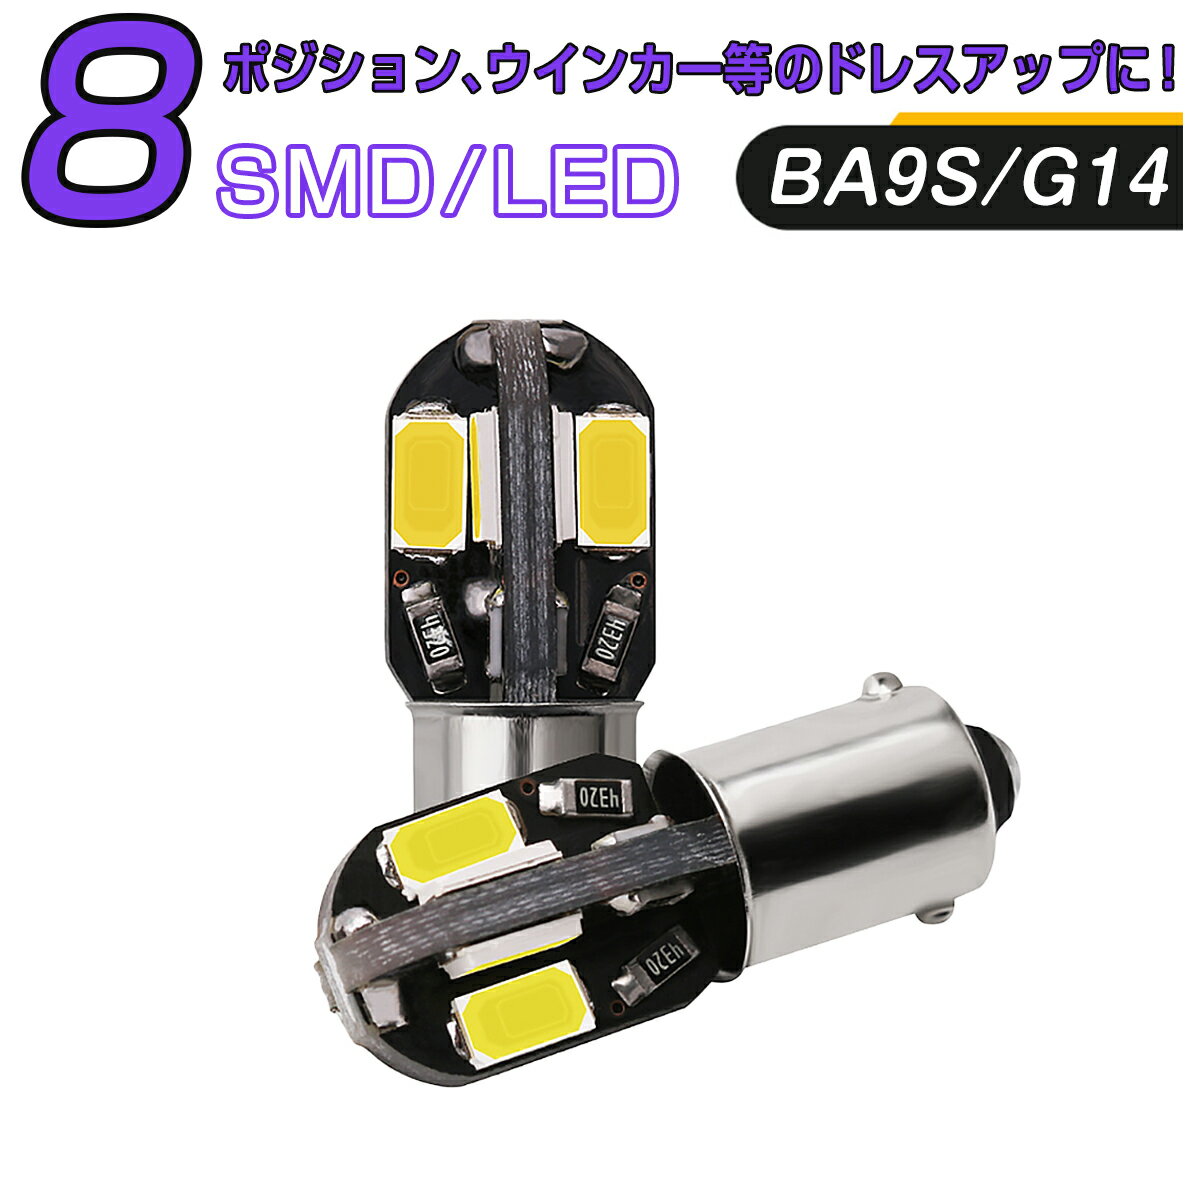 MERCEDES-BENZ用の非純正品 Gクラス S53～＃ W463 ポジション(車幅灯)[T8.5(BA9S)]白色 LED BA9S G14 8連 5630 SMD 白 LEDキャンセラー内蔵 2個セット 1ヶ月保証